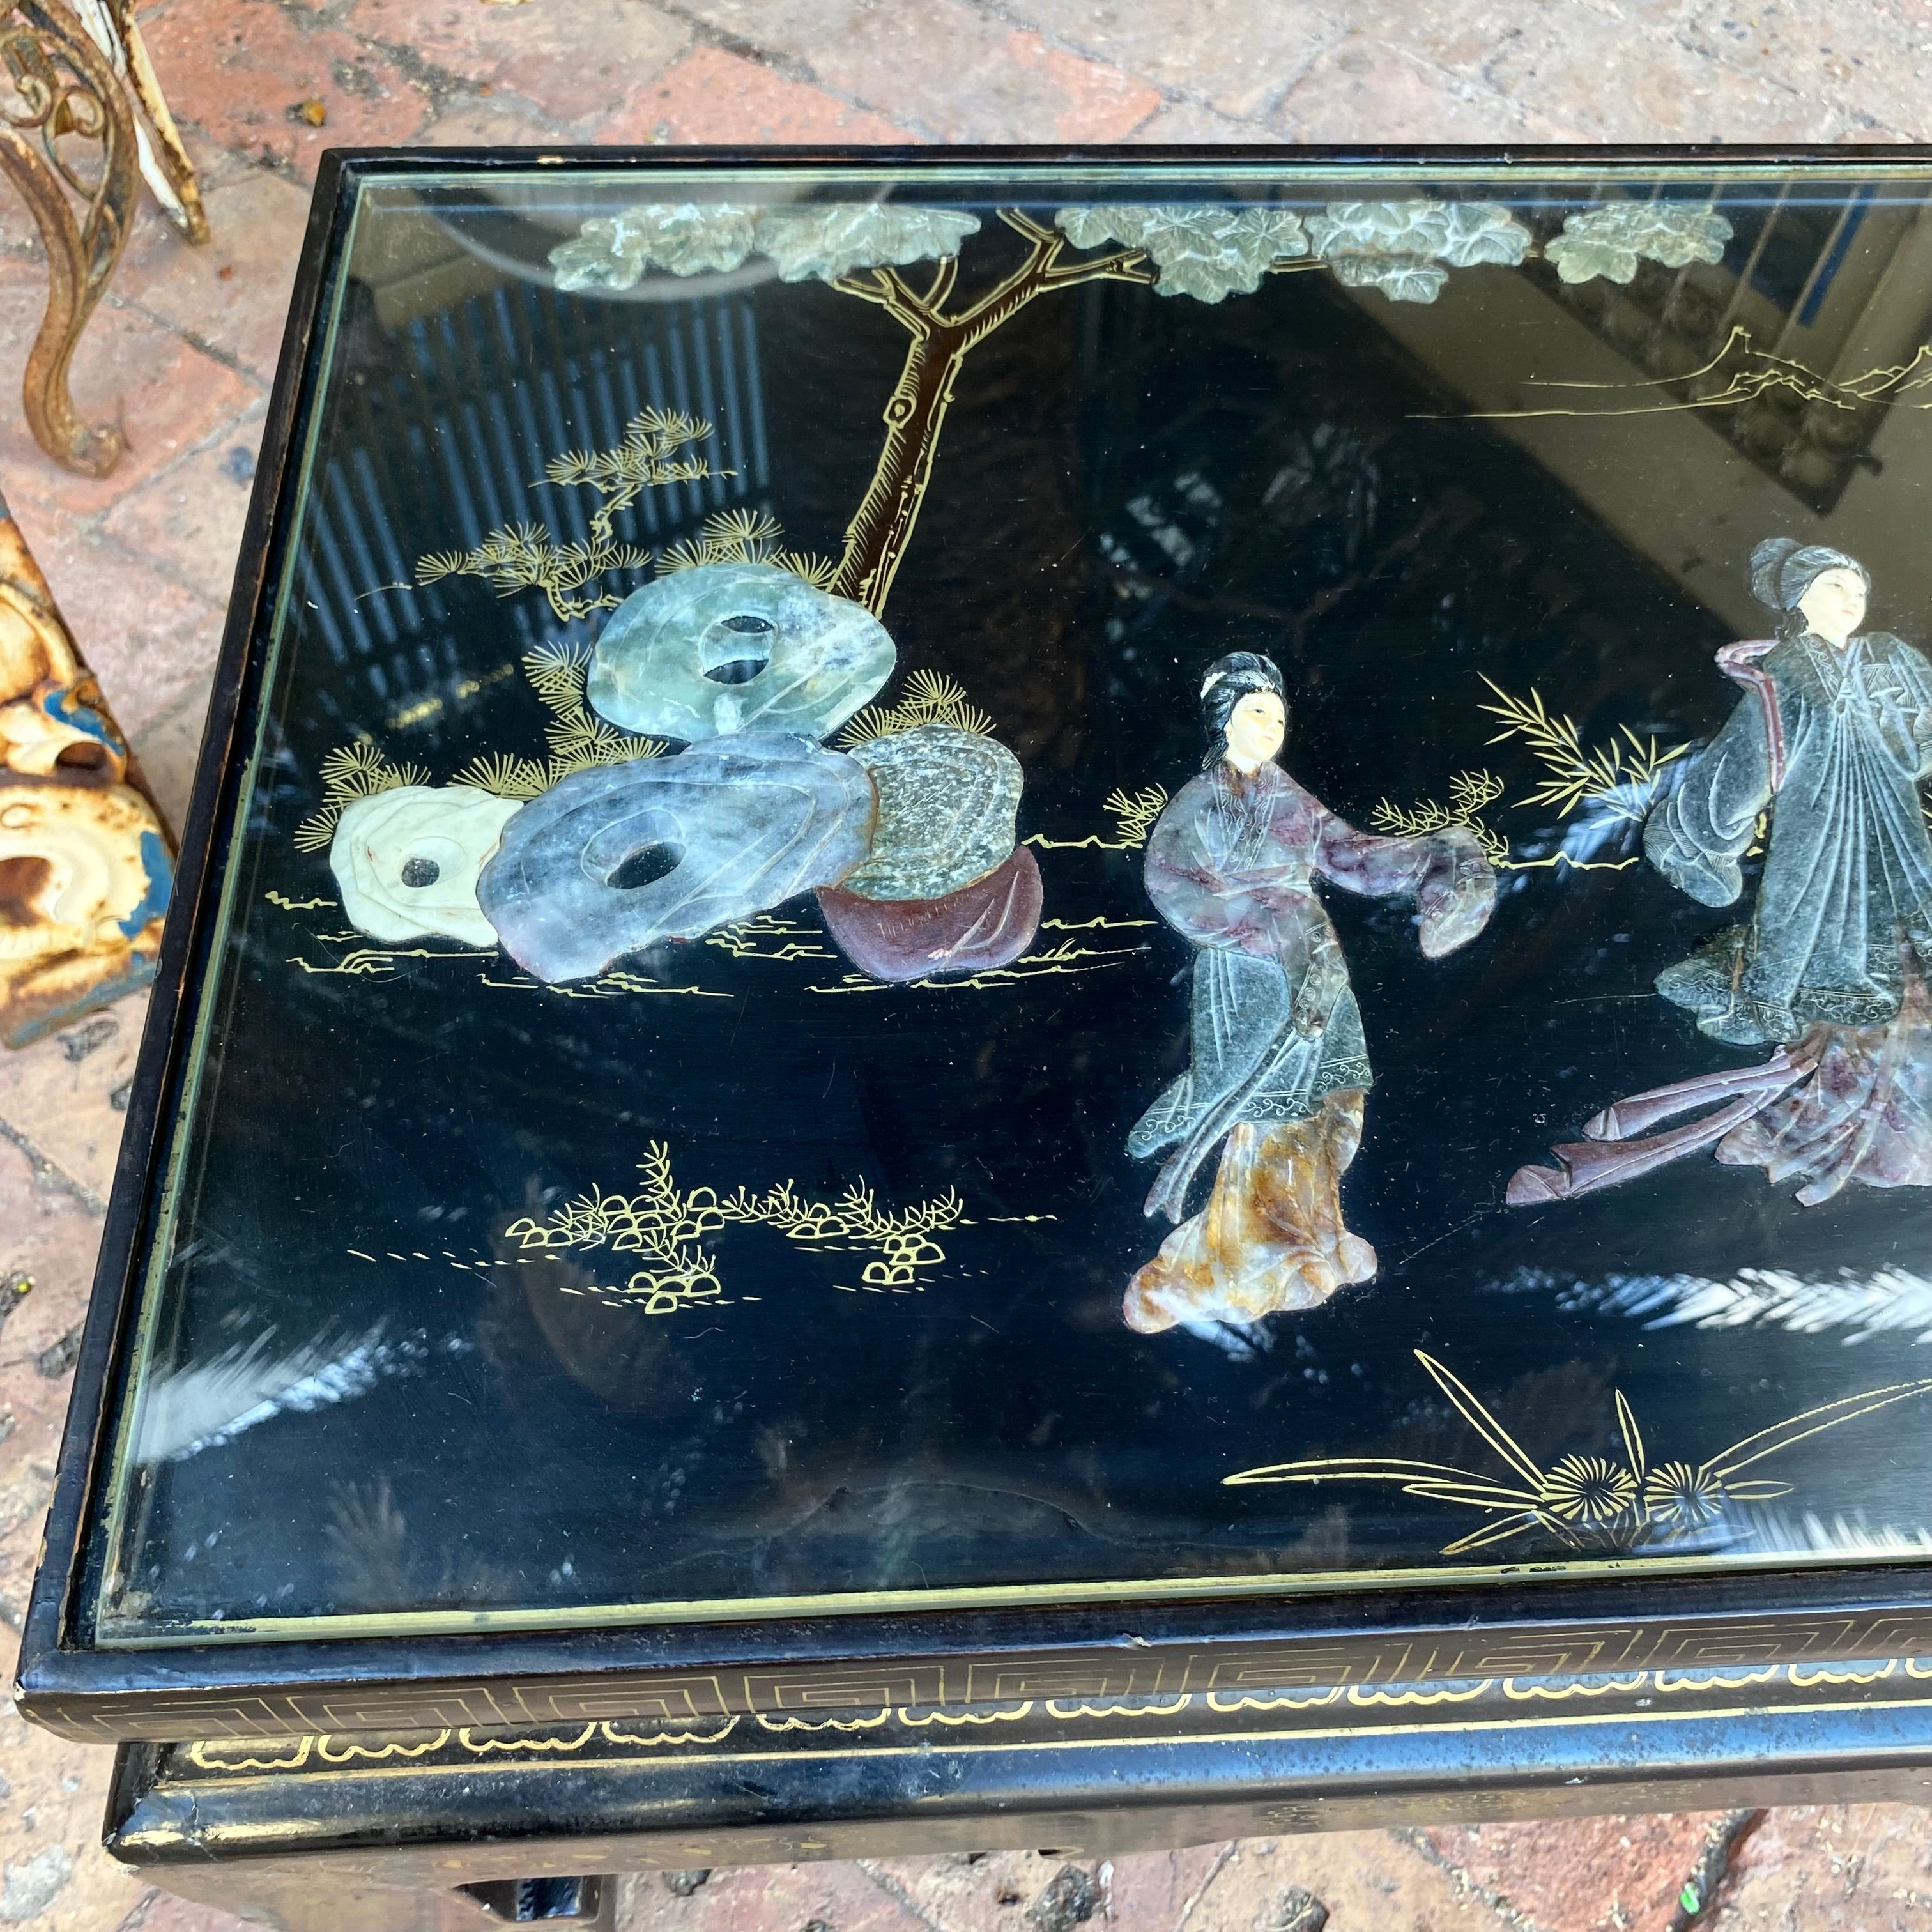 Antique Japanese Coffee Table